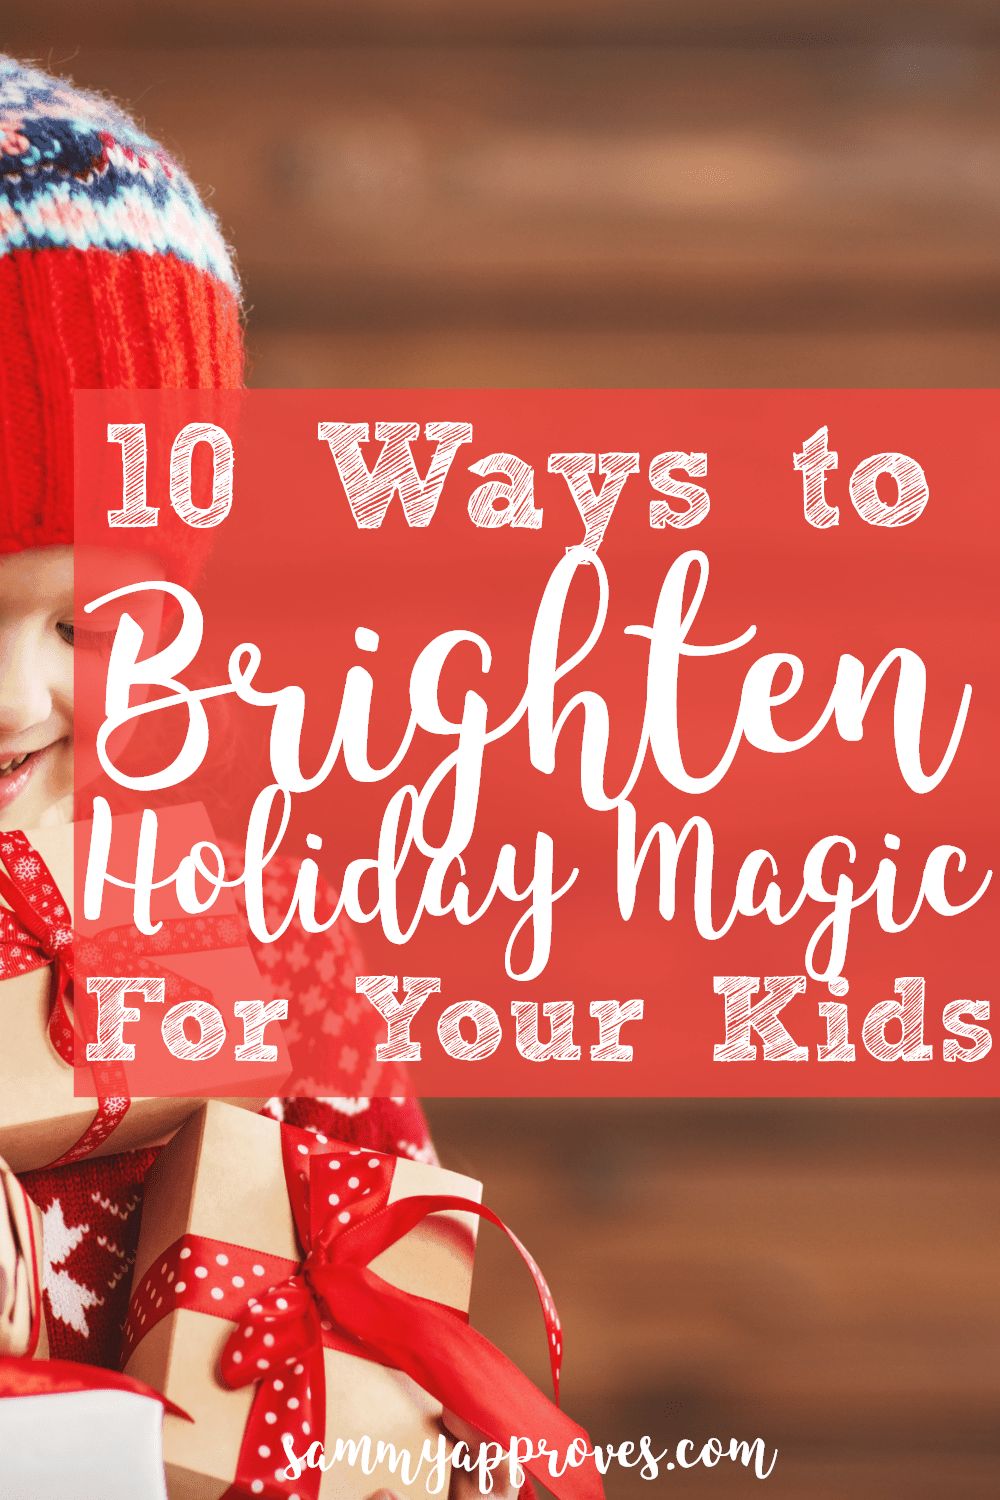 10 Ways to Brighten Holiday Magic For Your Kids